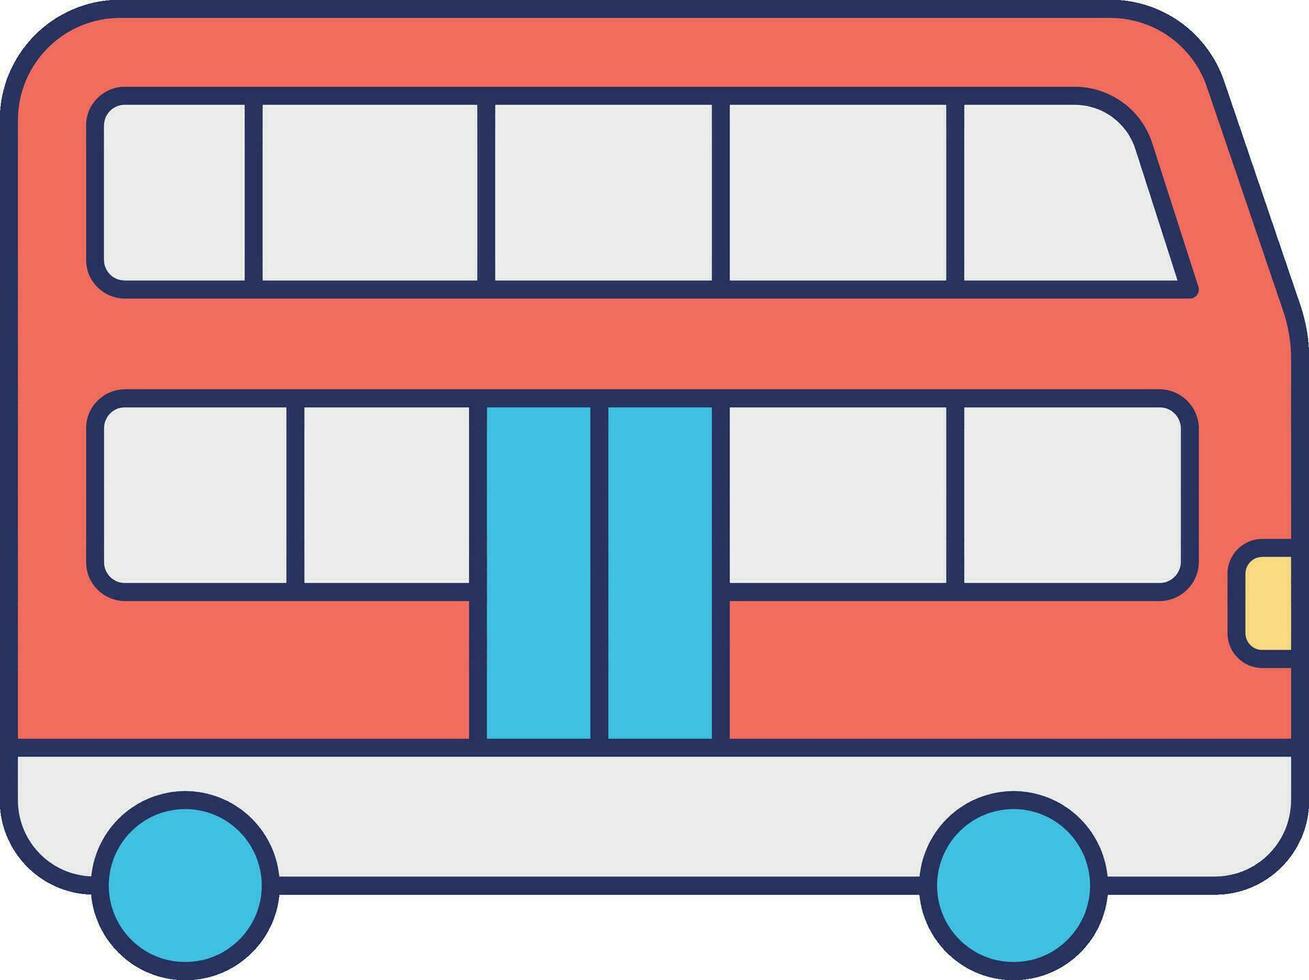 Isolated Double Decker Bus Icon In Orange And Blue Color. vector